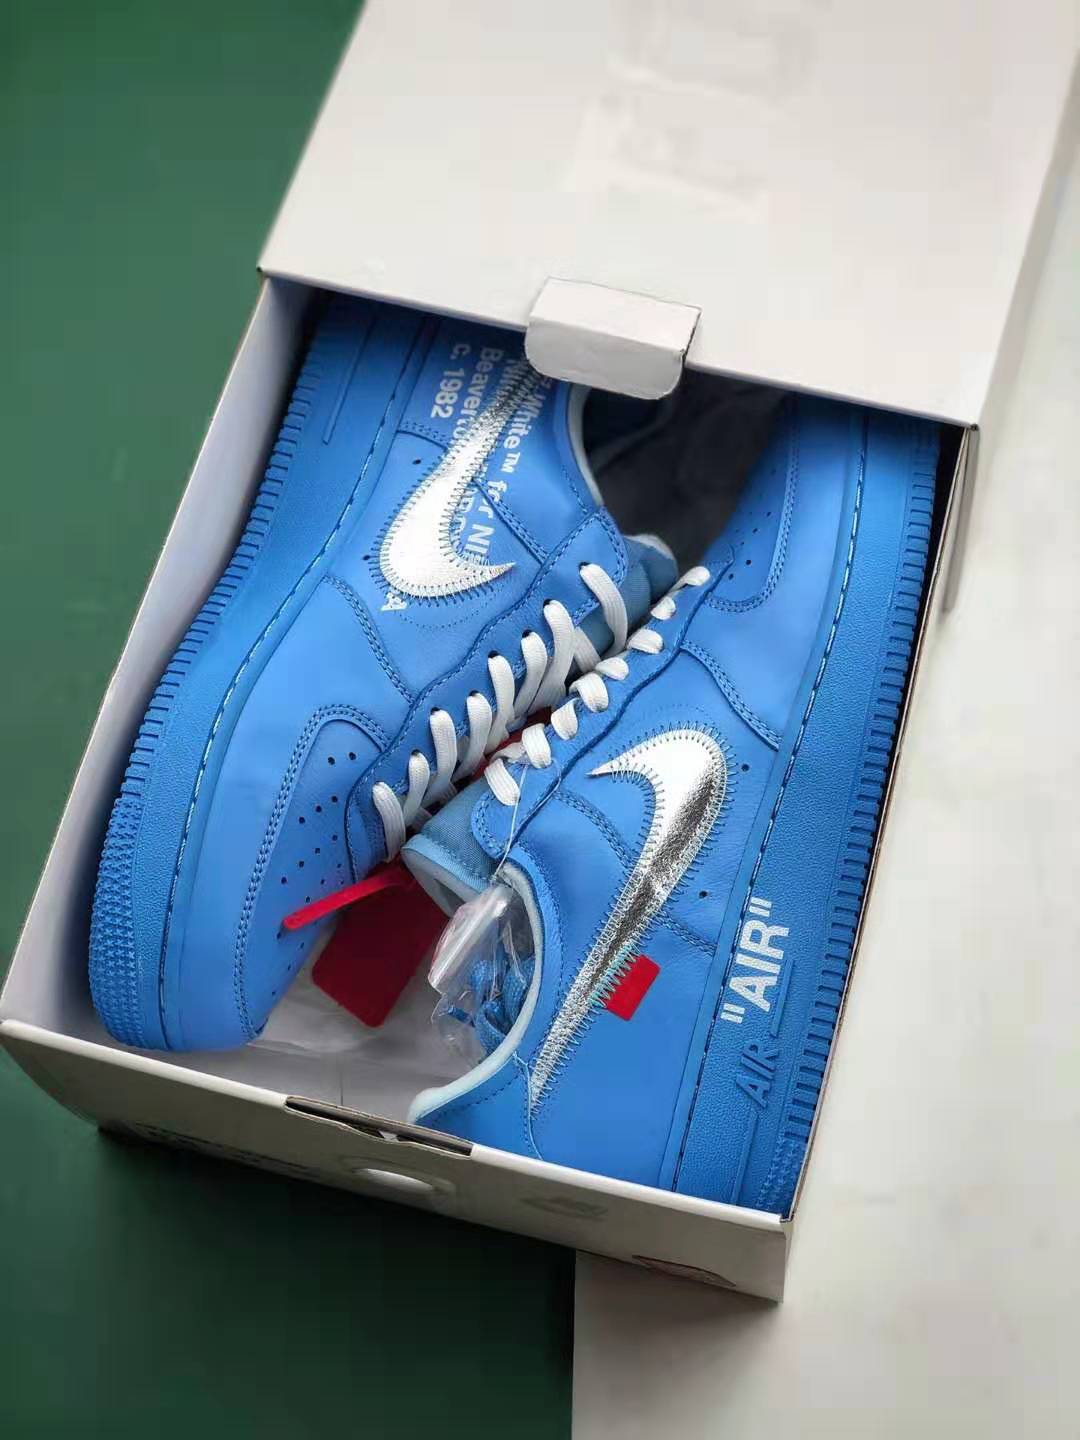 Nike Air Force 1 Low Off-White MCA University Blue - Limited Edition Sneakers